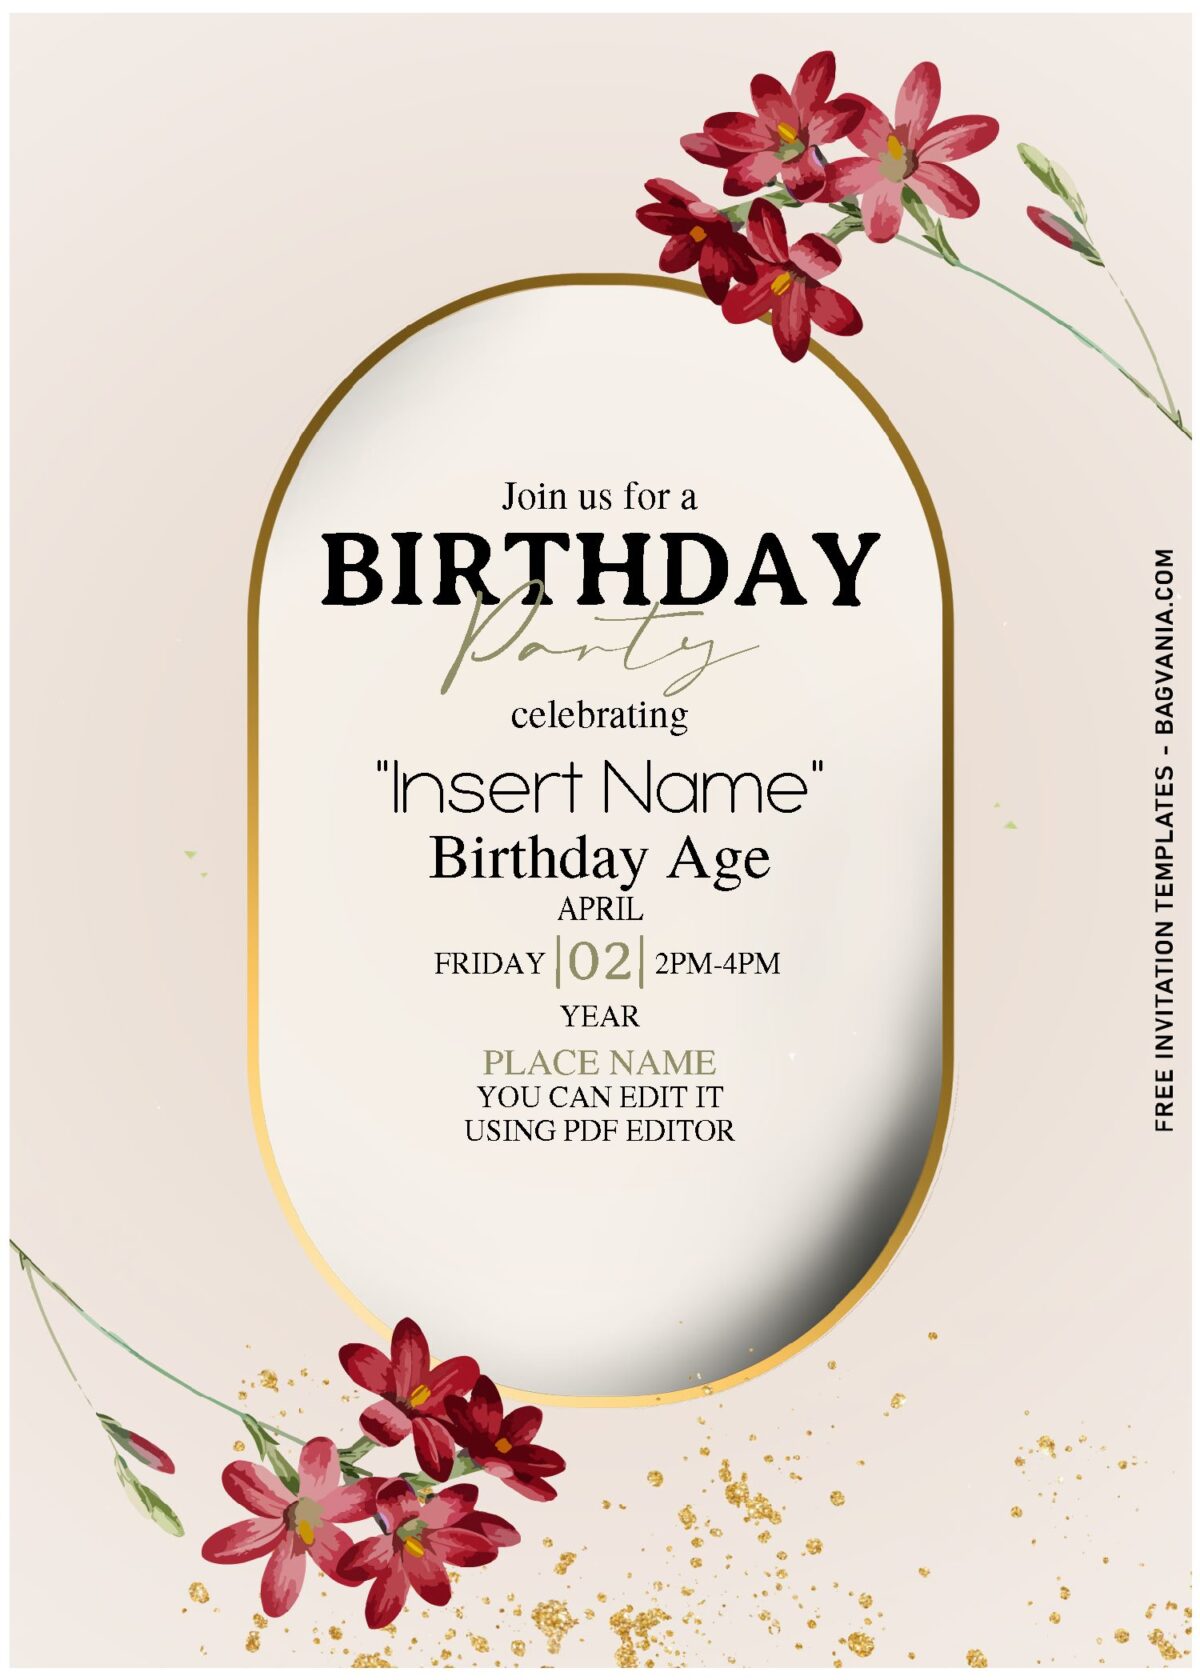 (Free Editable PDF) Butterfly Garden Birthday Invitation Templates with flower vines